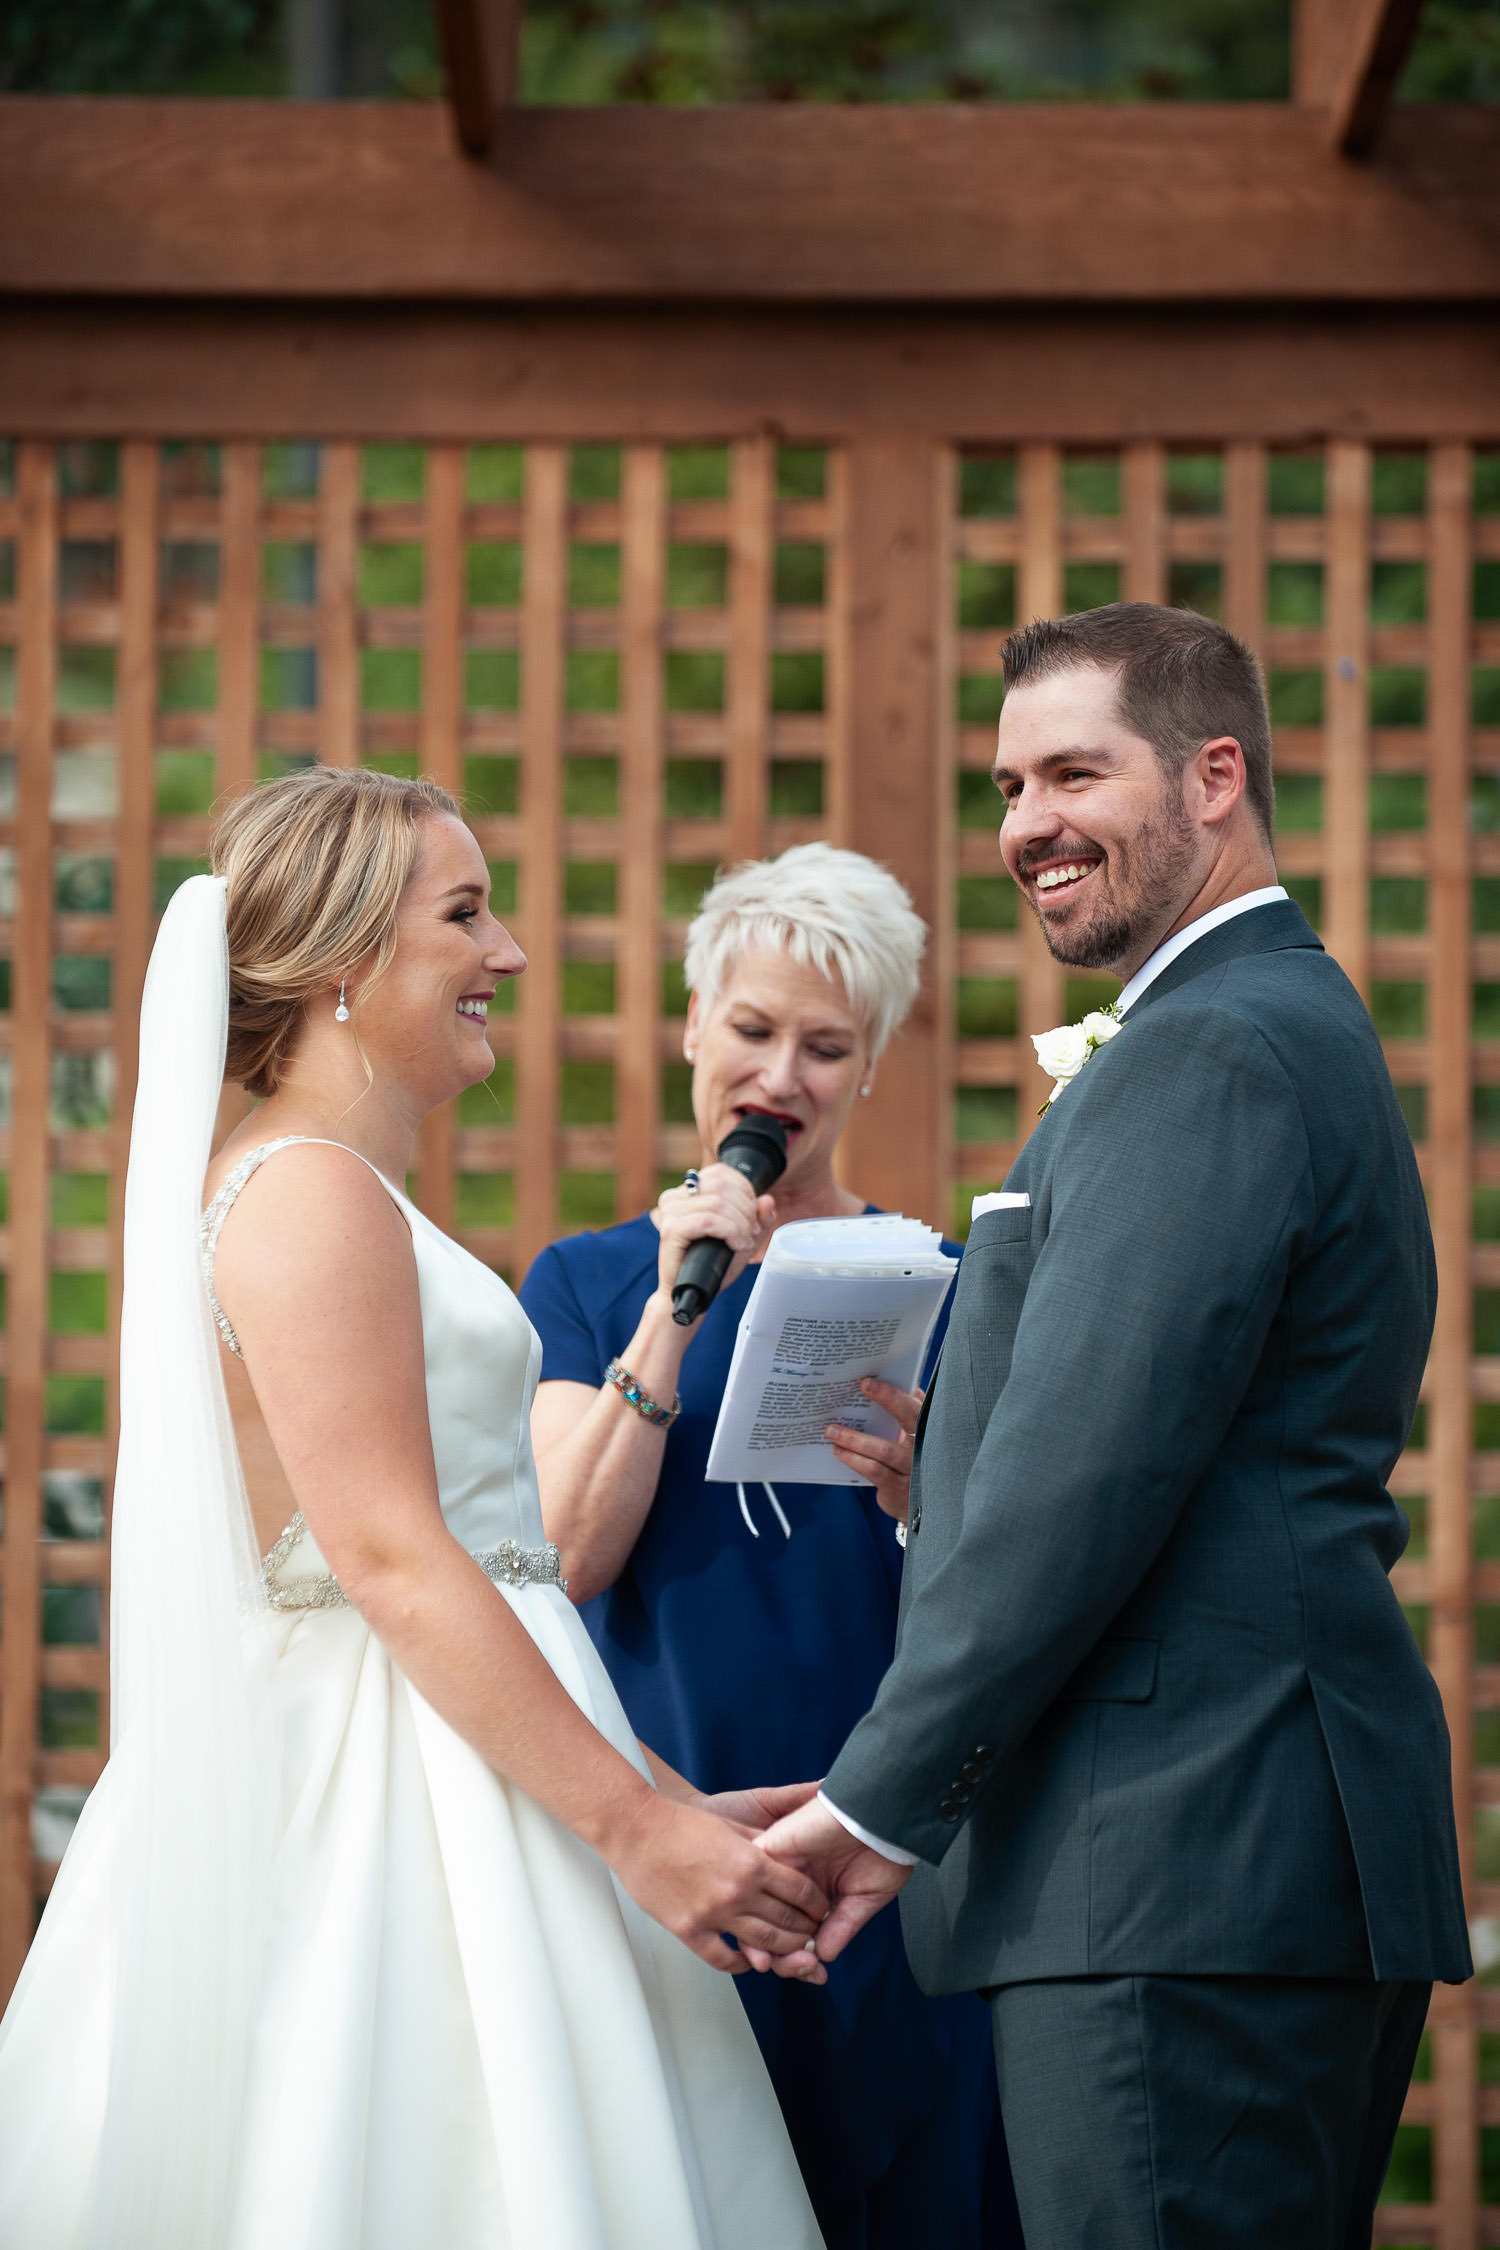 Wedding ceremony at Creekside Villa in Canmore captured by Tara Whittaker Photography